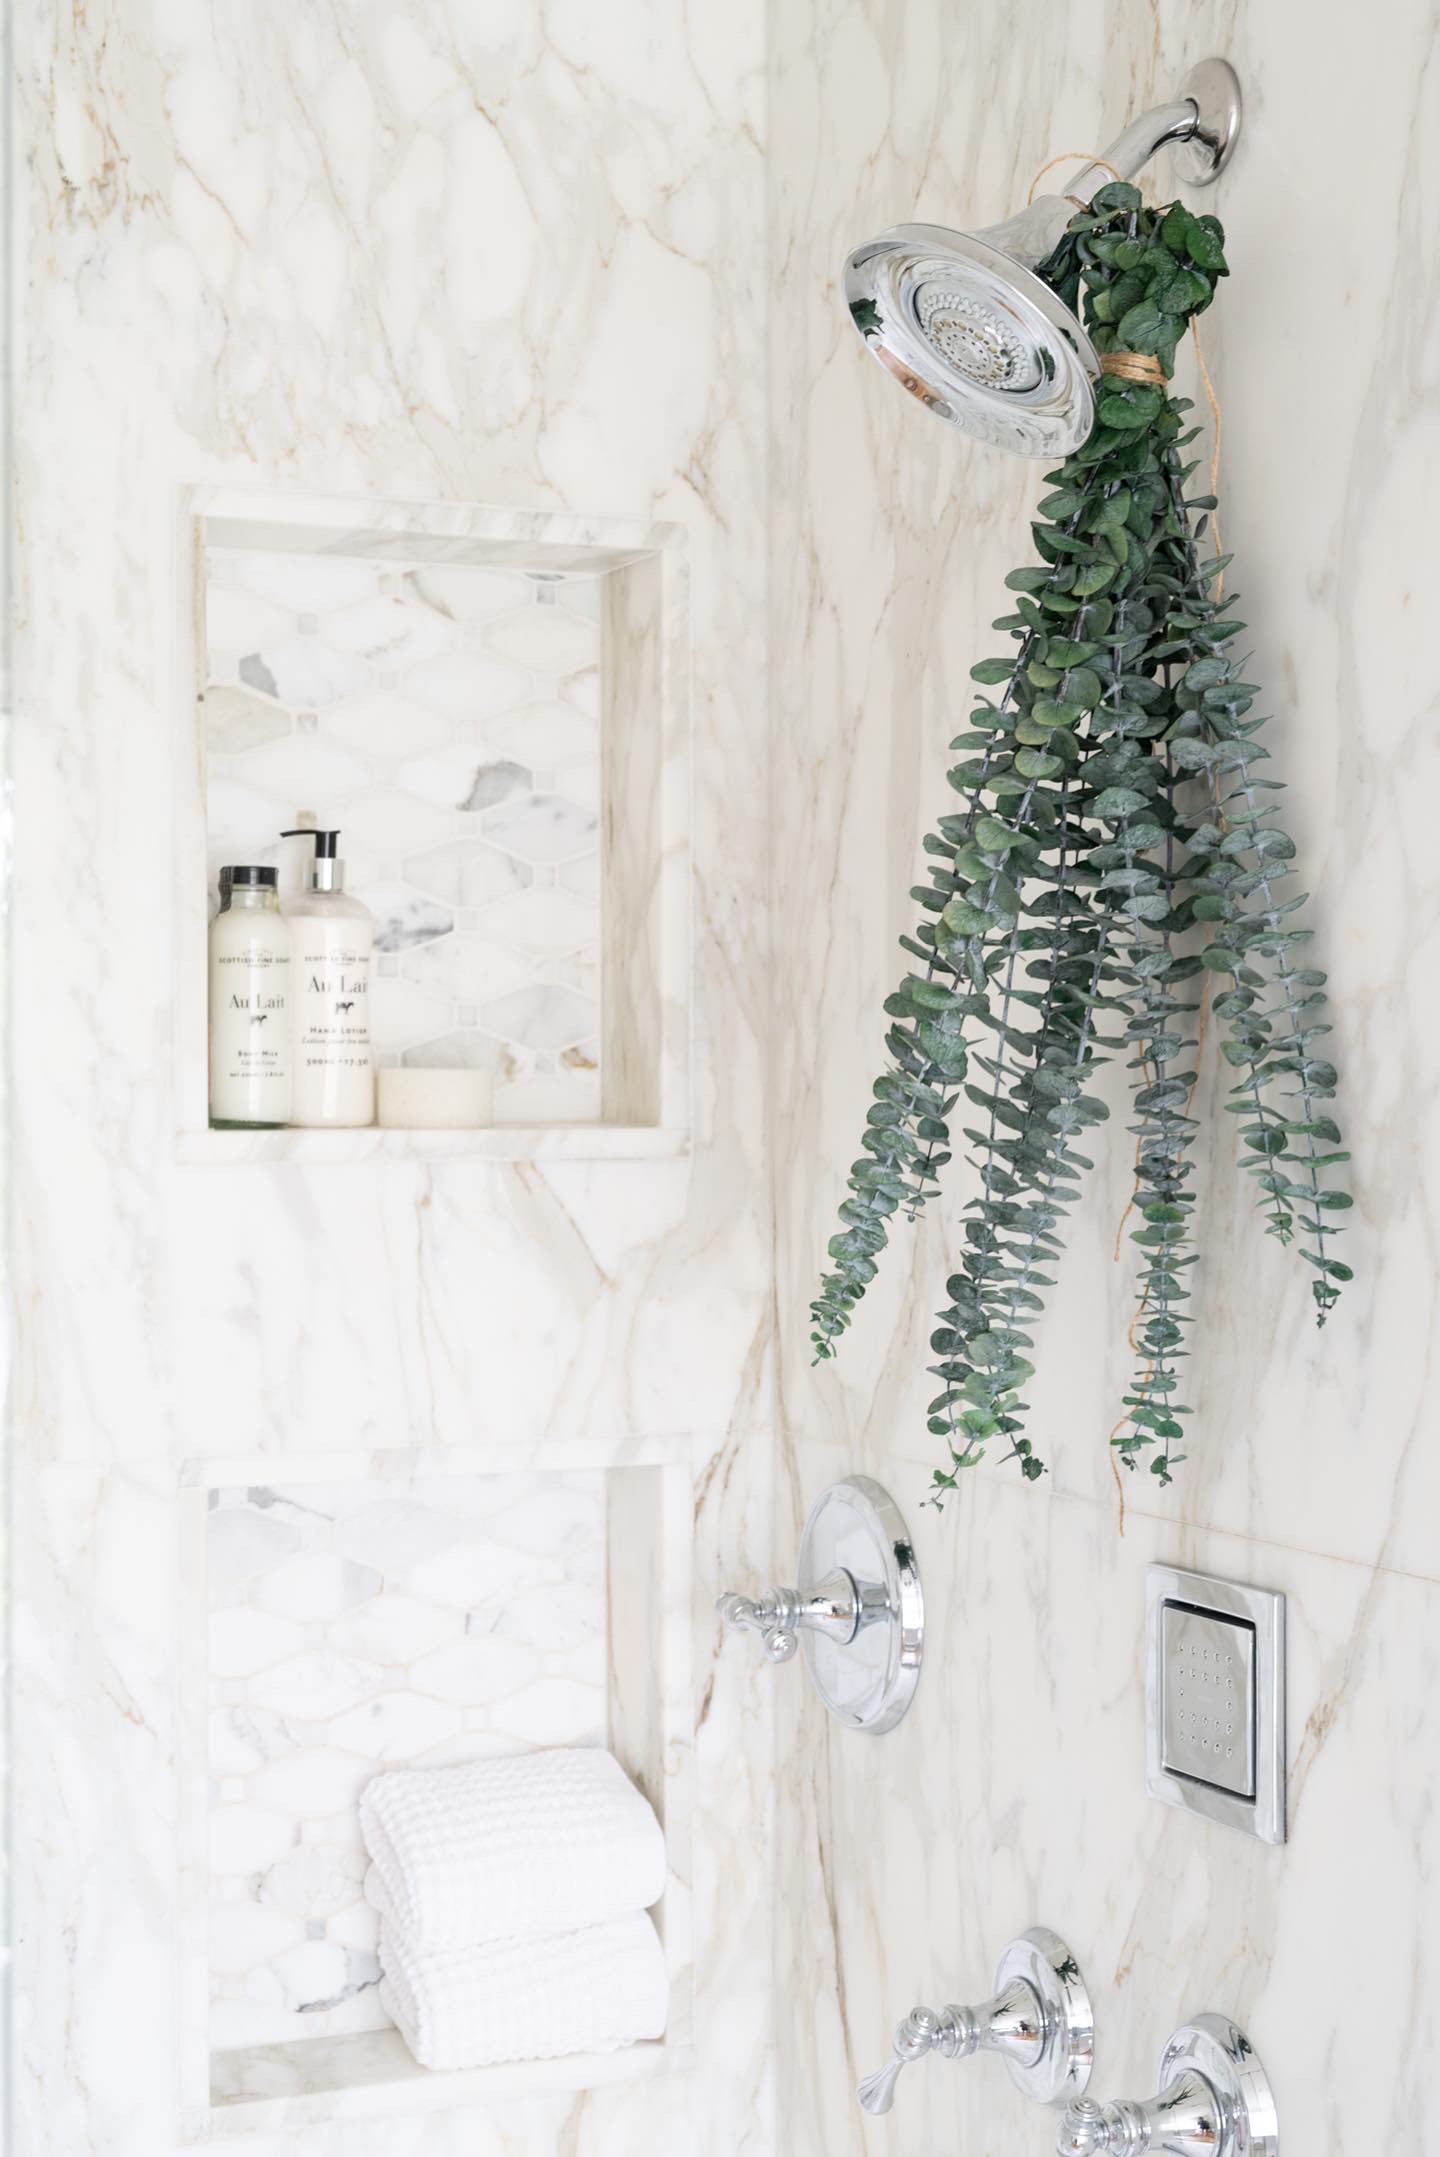 Eucalypt Co. Eucalyptus Shower Bundles offer an aromatherapy experience for months on end. 